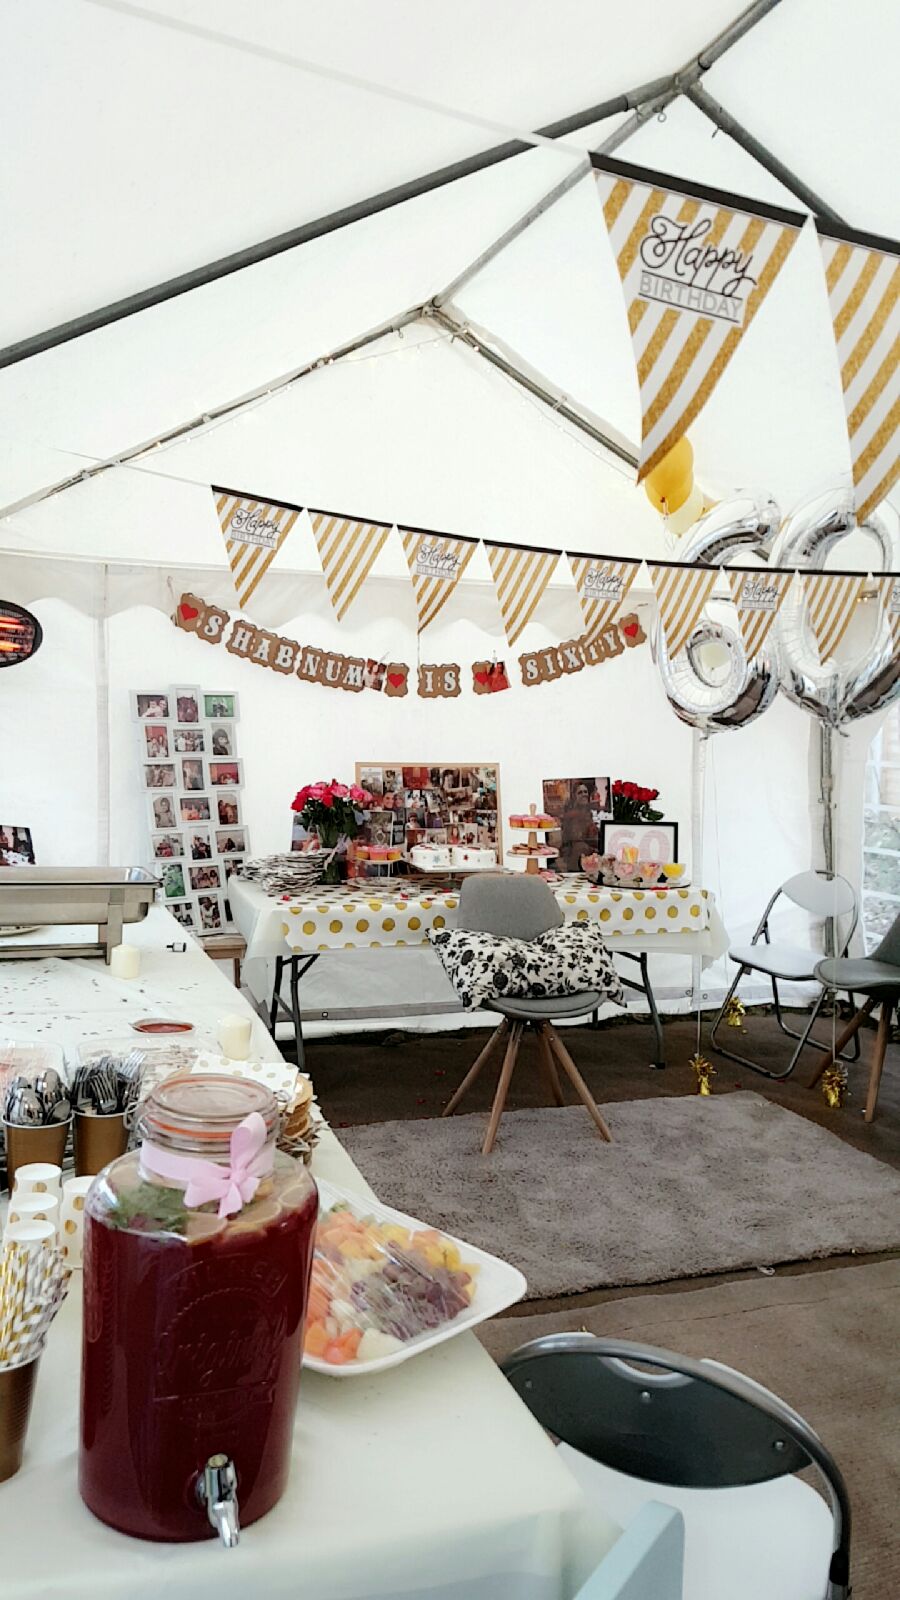 birthday party marquee hire